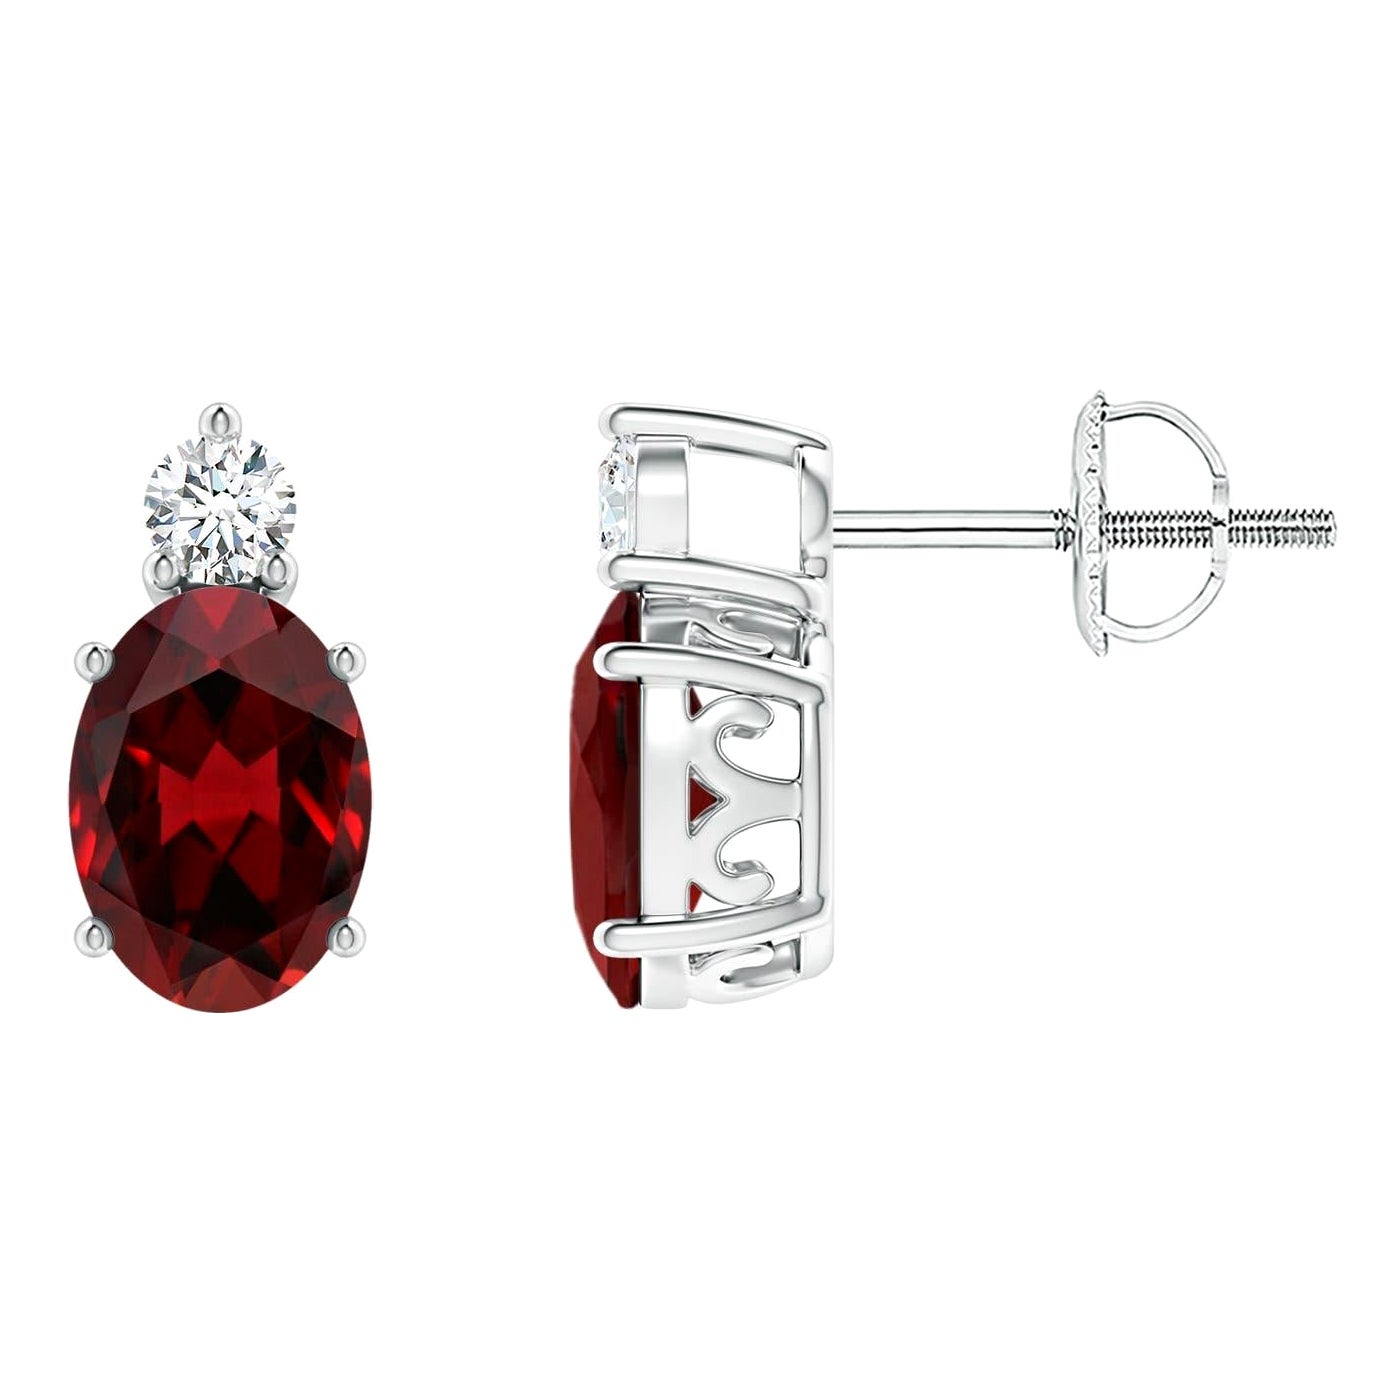 Natural Oval 1.8ct Garnet Stud Earrings with Diamond in Platinum (Size-7x5mm) For Sale